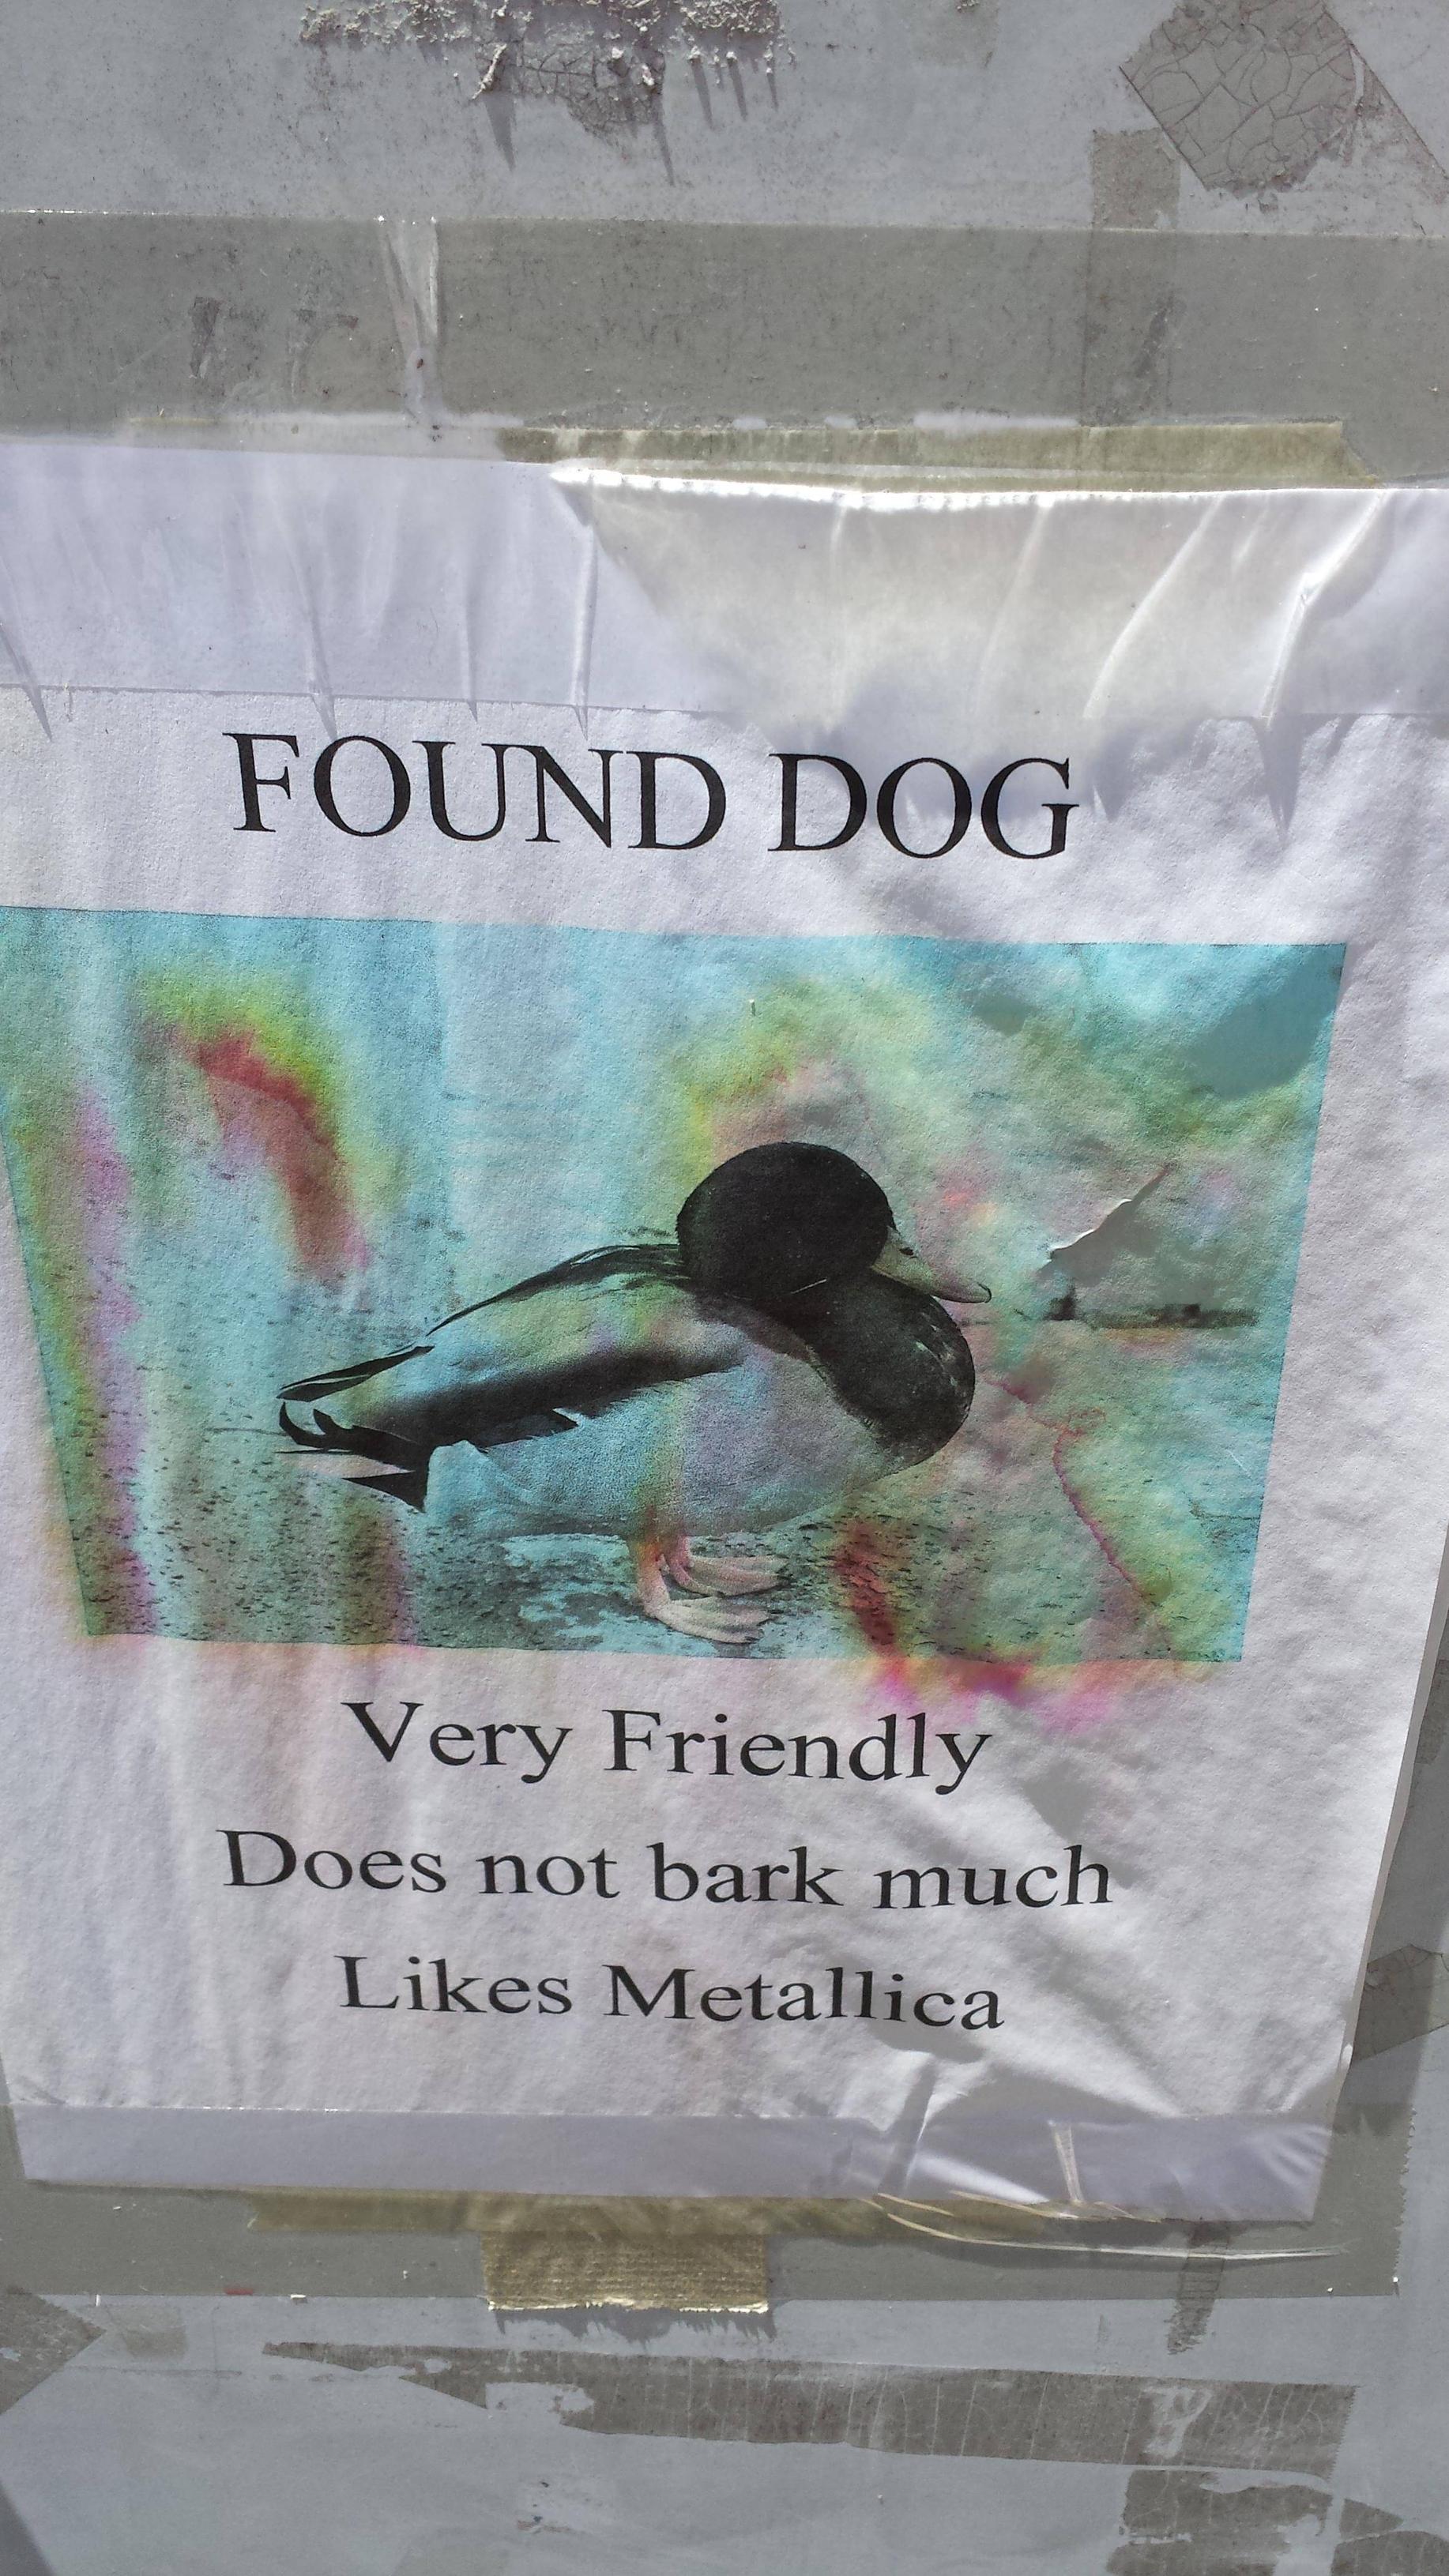 I hope they get their dog back.